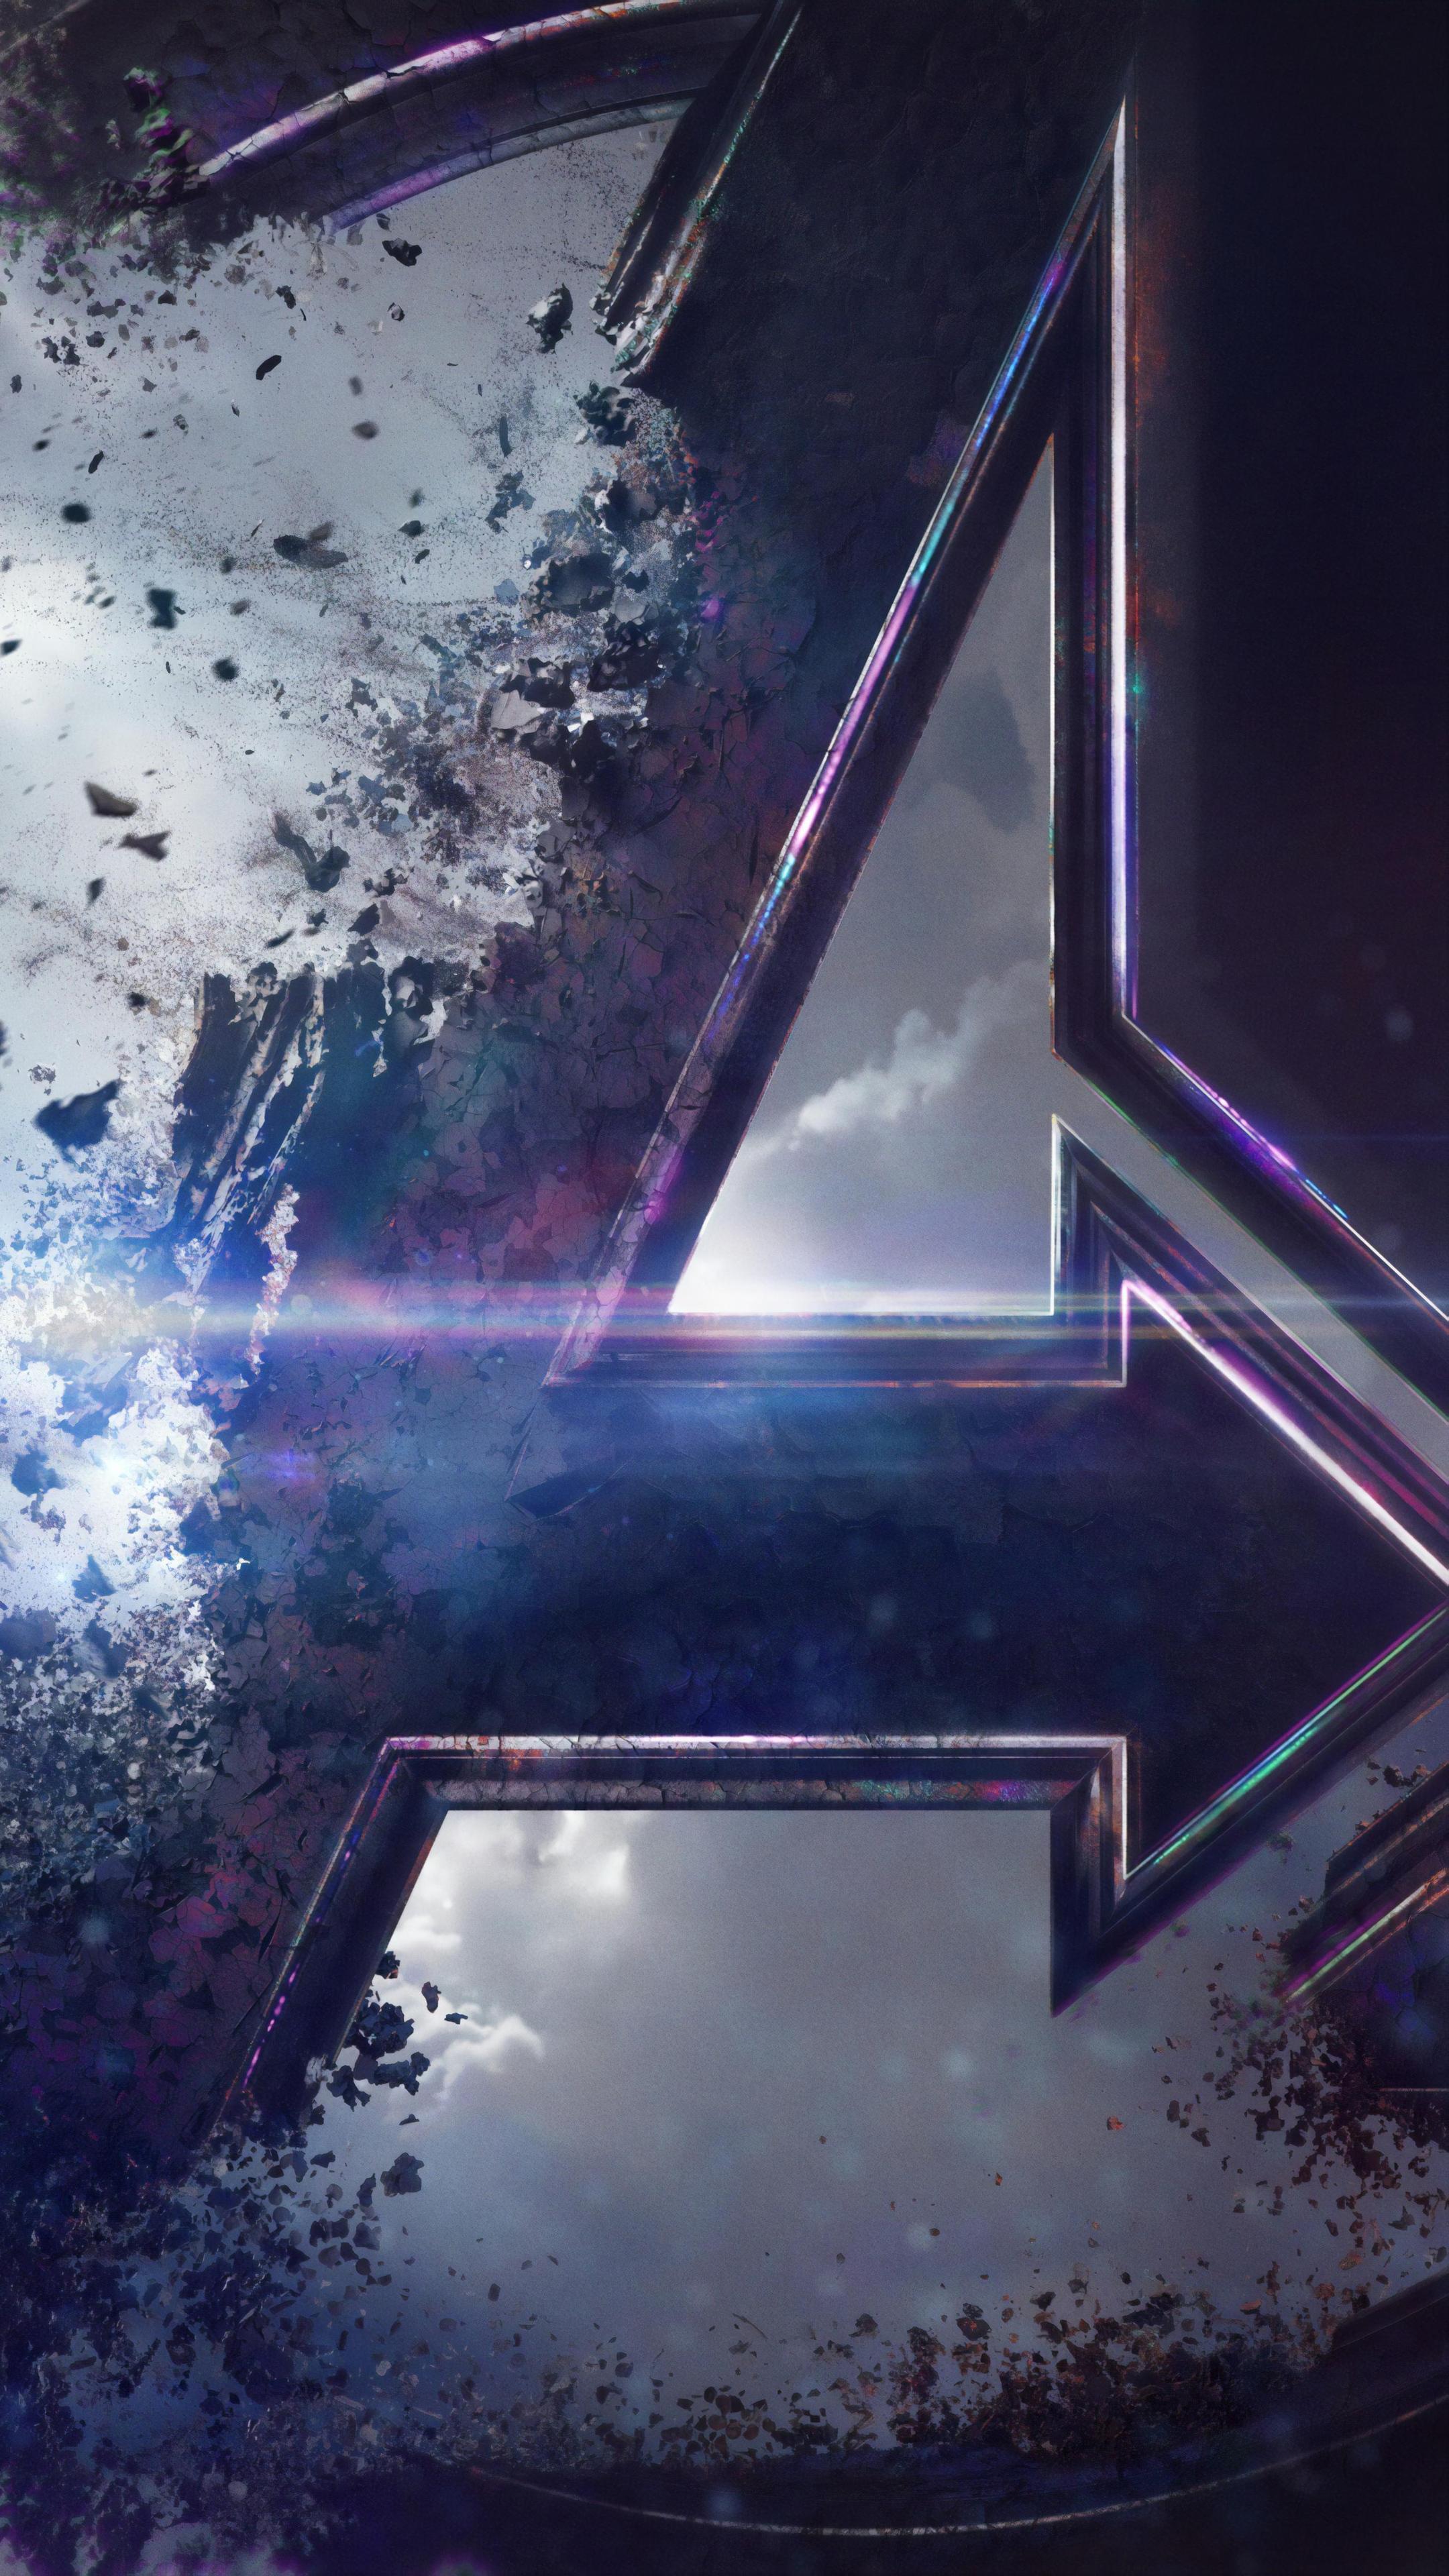 Avengers End Game HD 4k Wallpaper (UHD) for Android